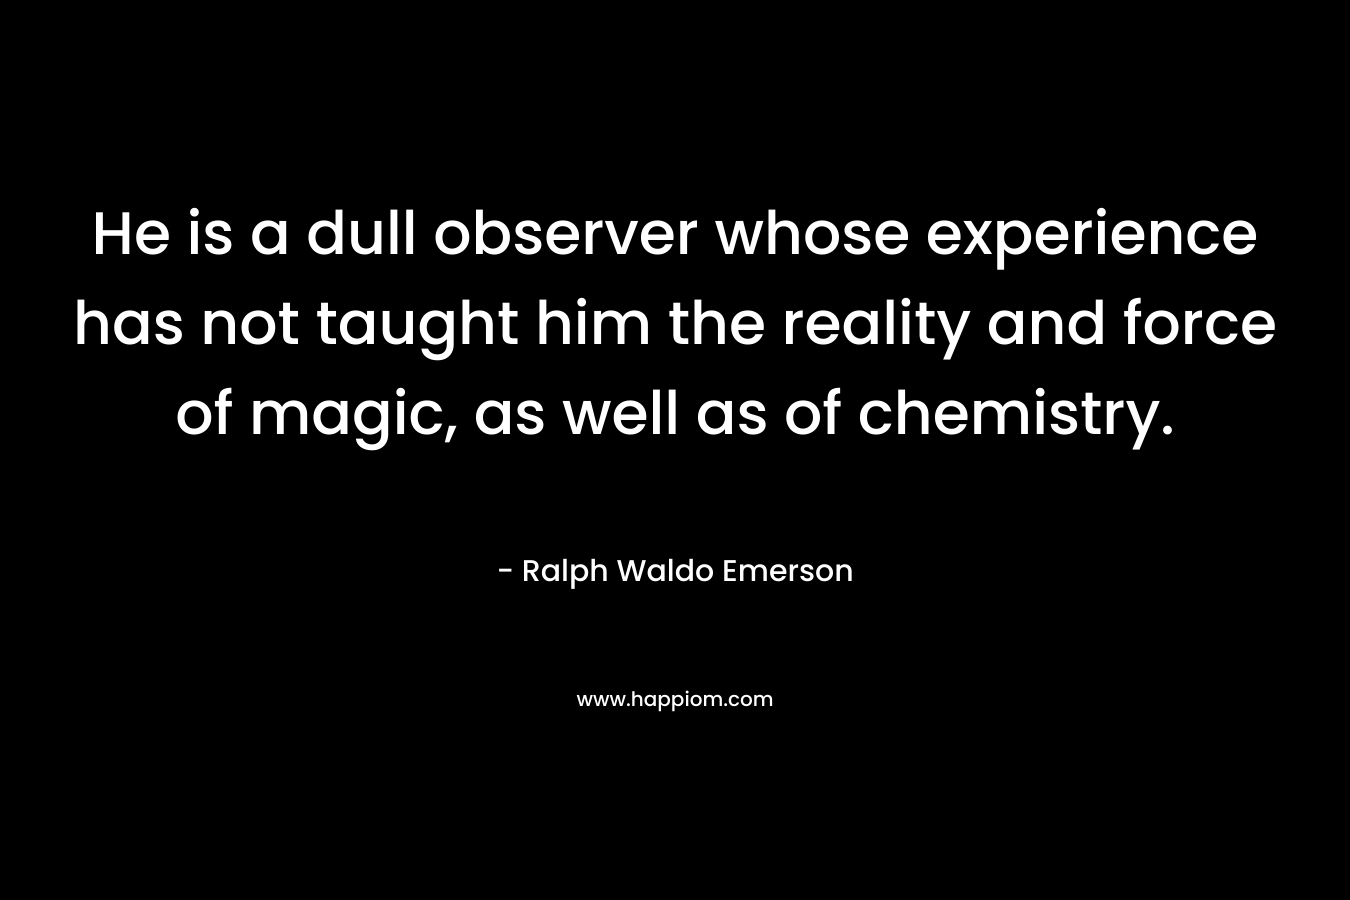 He is a dull observer whose experience has not taught him the reality and force of magic, as well as of chemistry.